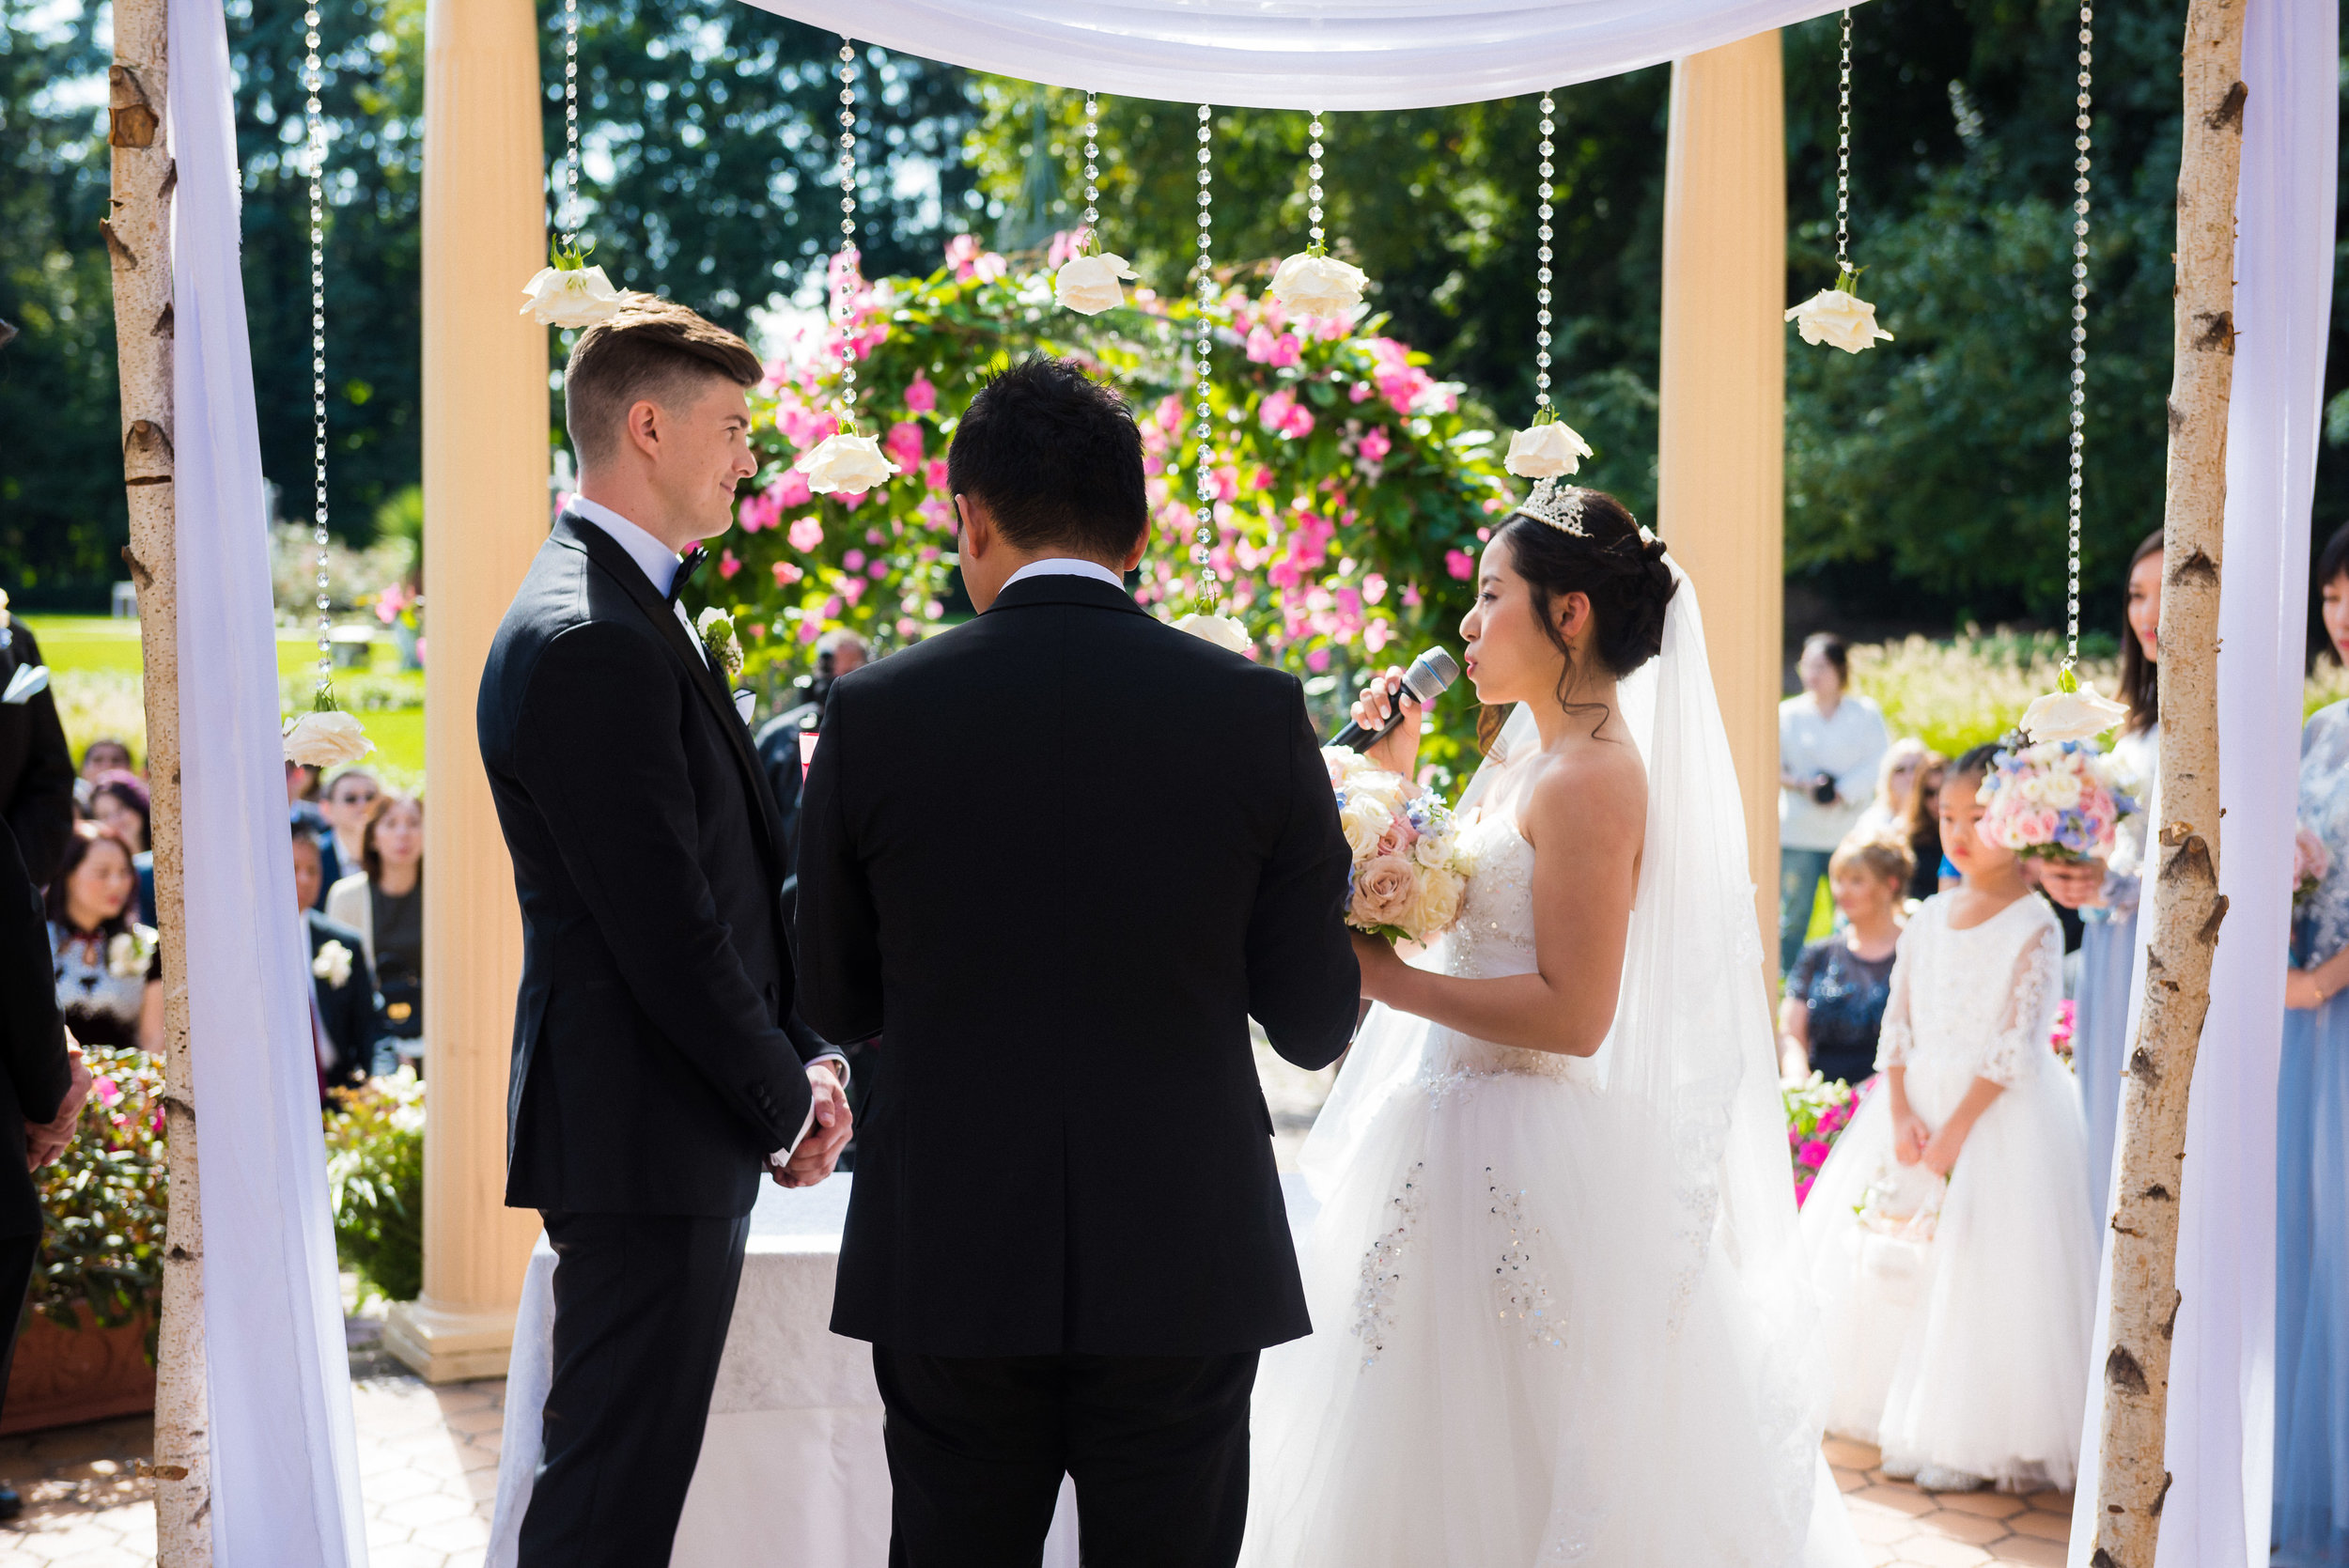  ping and brent both had their own vows during their ceremony. i like the view from behind because you get to see their friends and family in the background watch this new jersey wedding in west orange at the manor. 